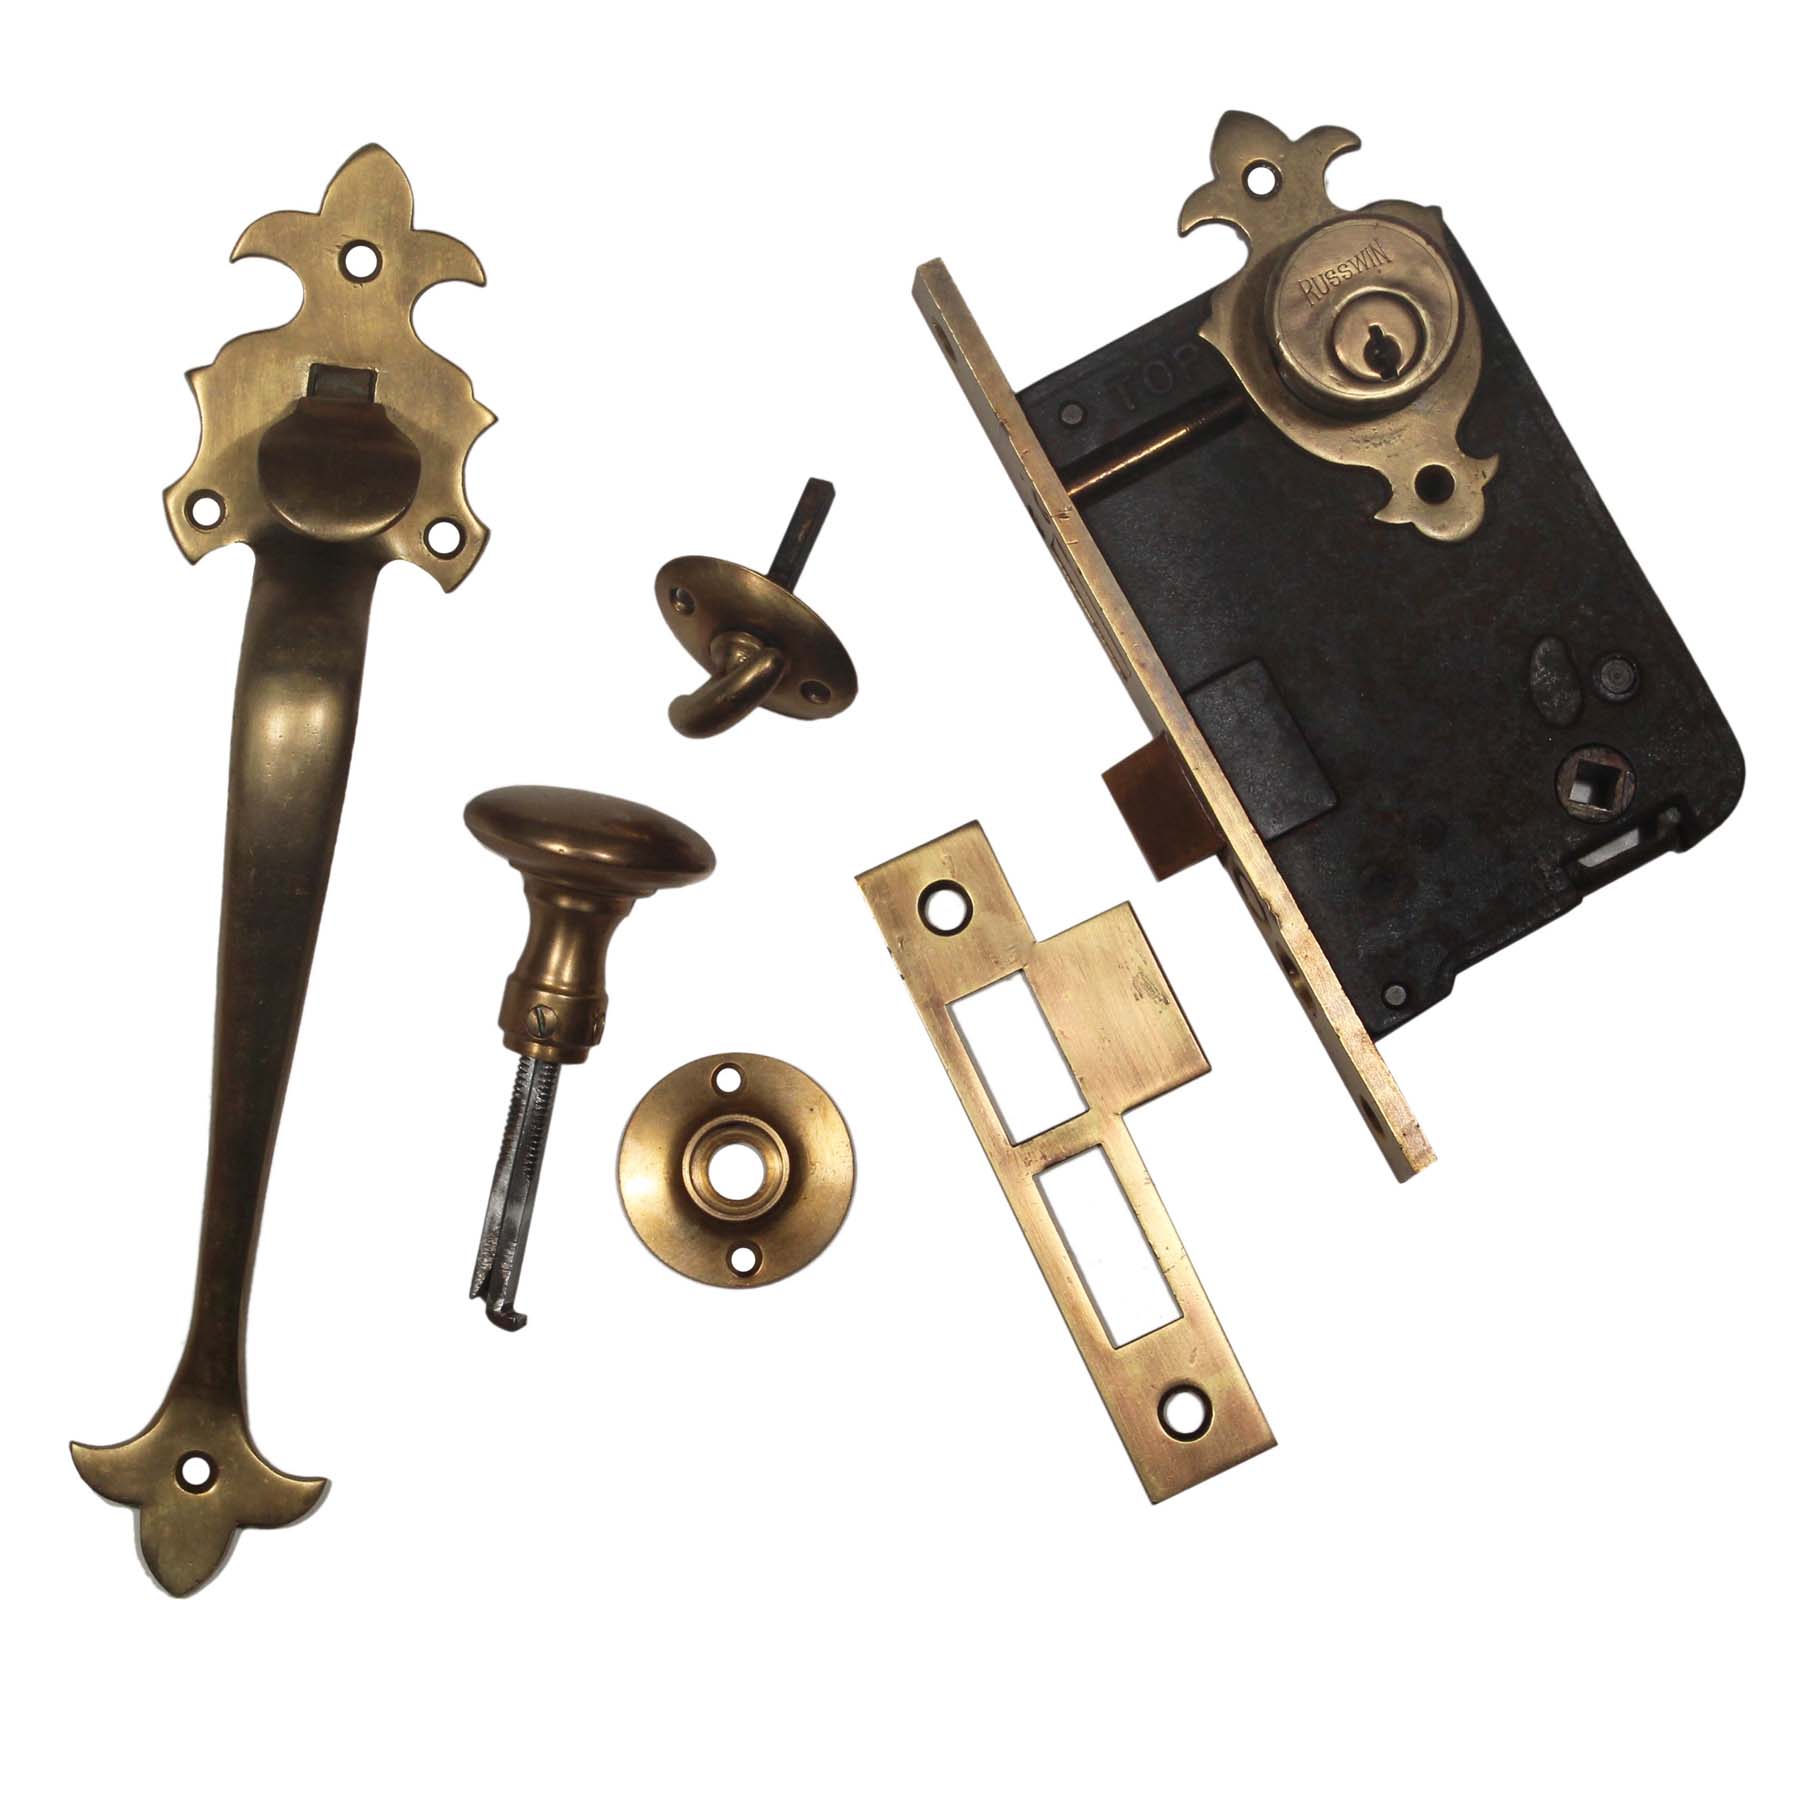 SOLD Complete Antique Brass Thumb Latch Entry Set by Welch-0